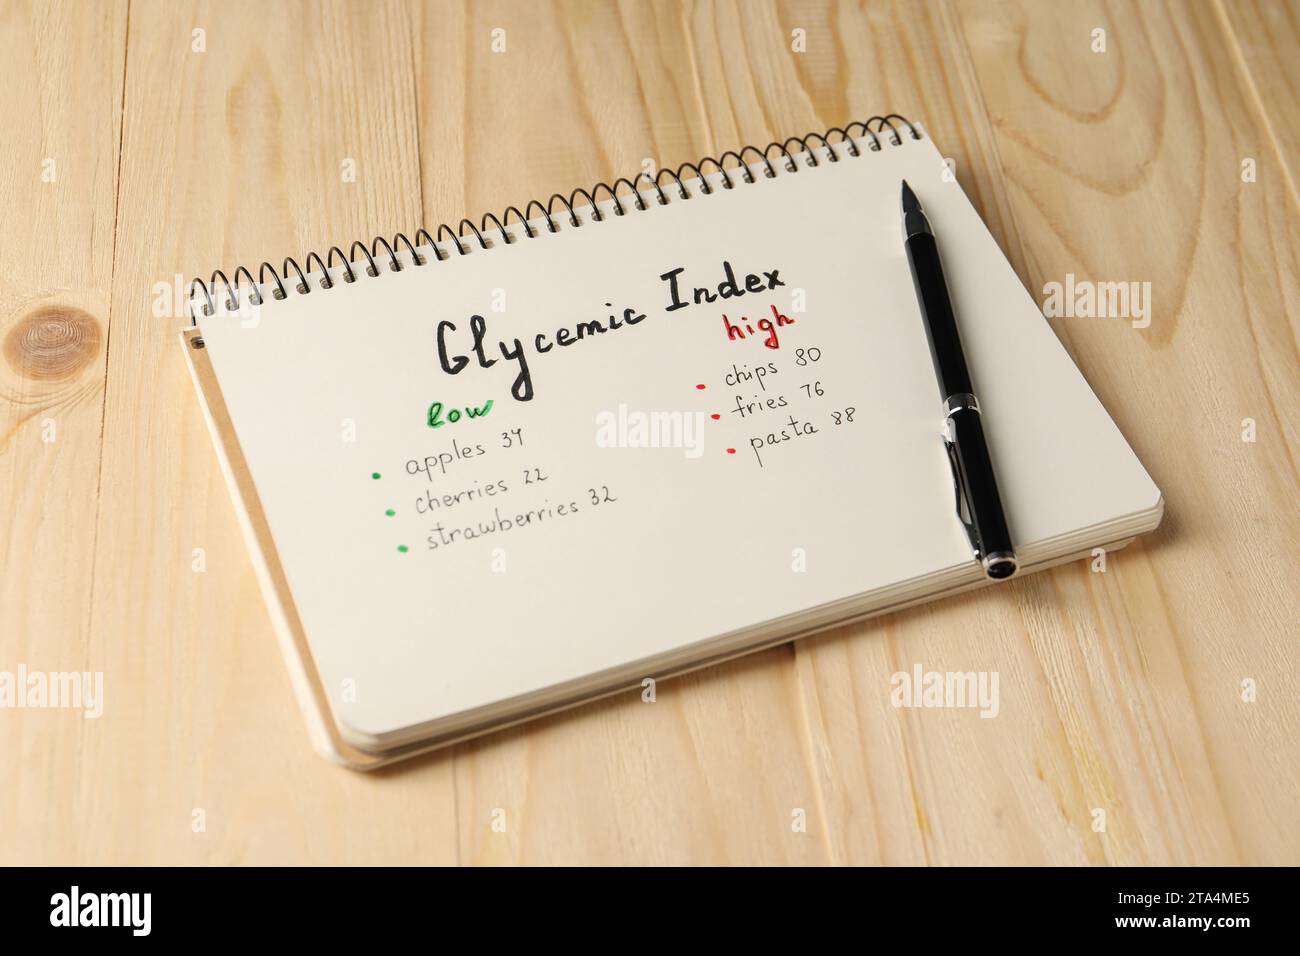 List with products of low and high glycemic index in notebook and pen on wooden table Stock Photo